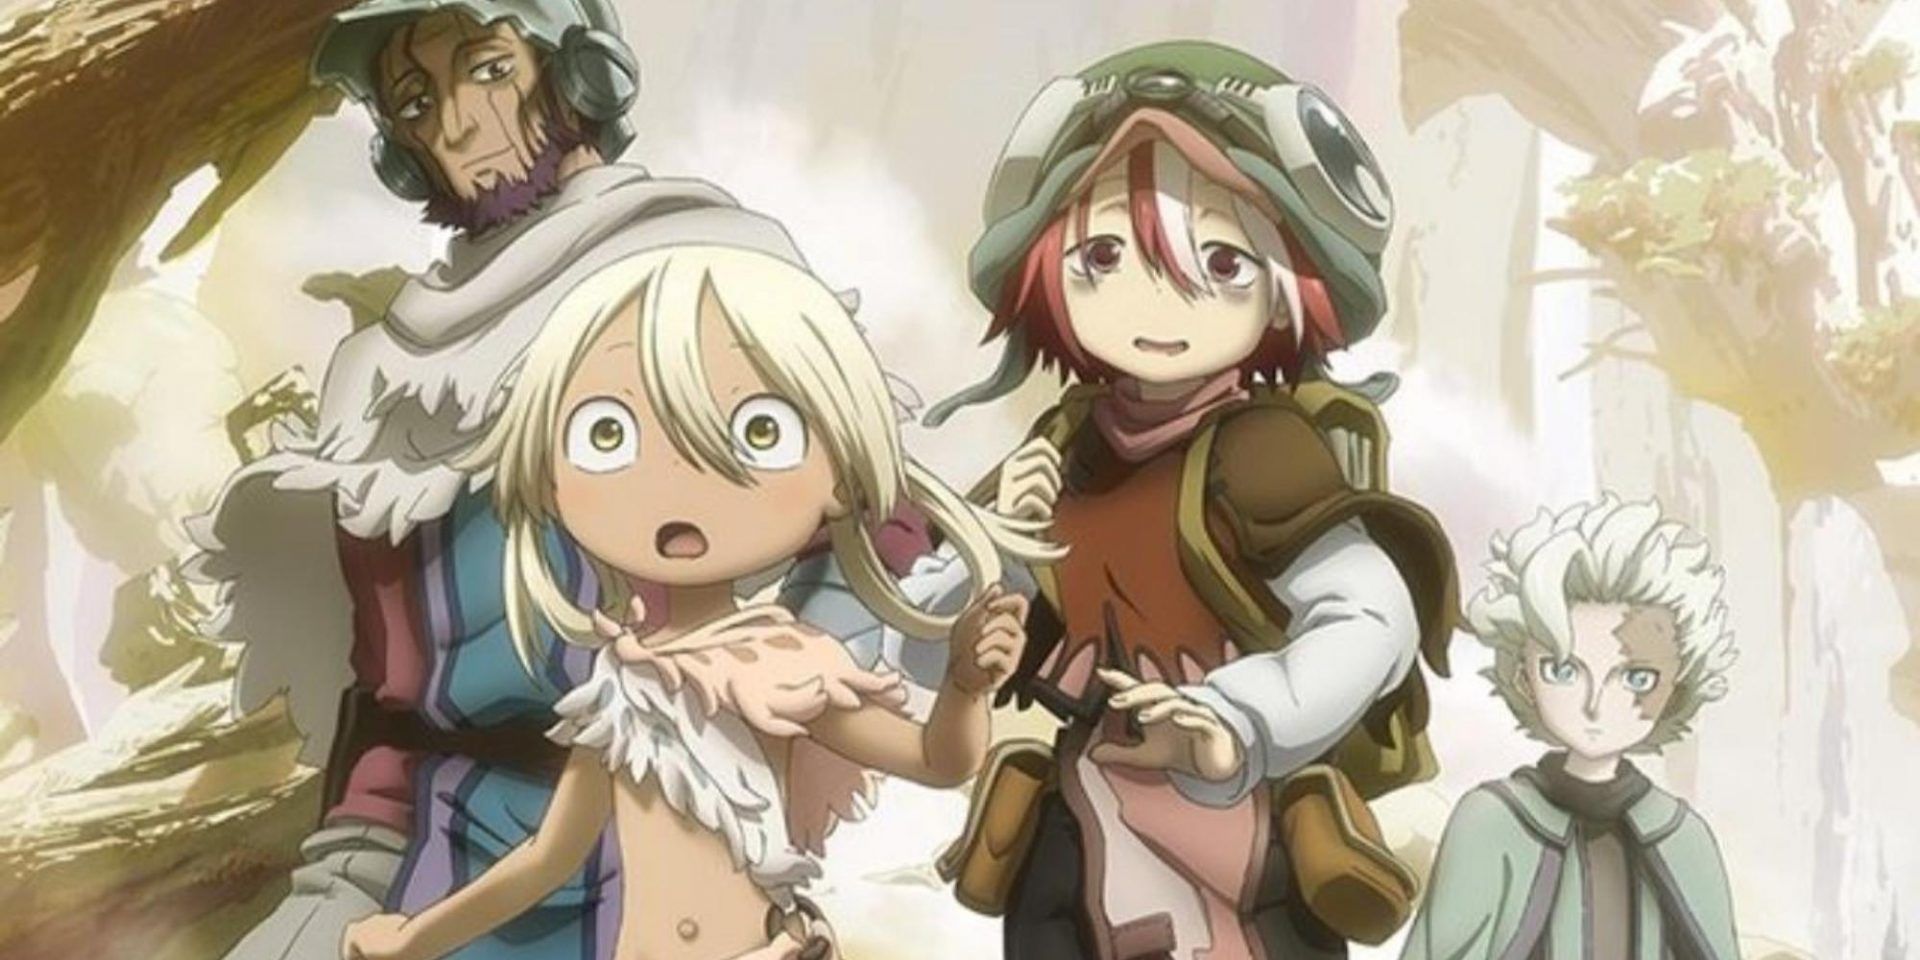 Made in Abyss season 2 episode 8